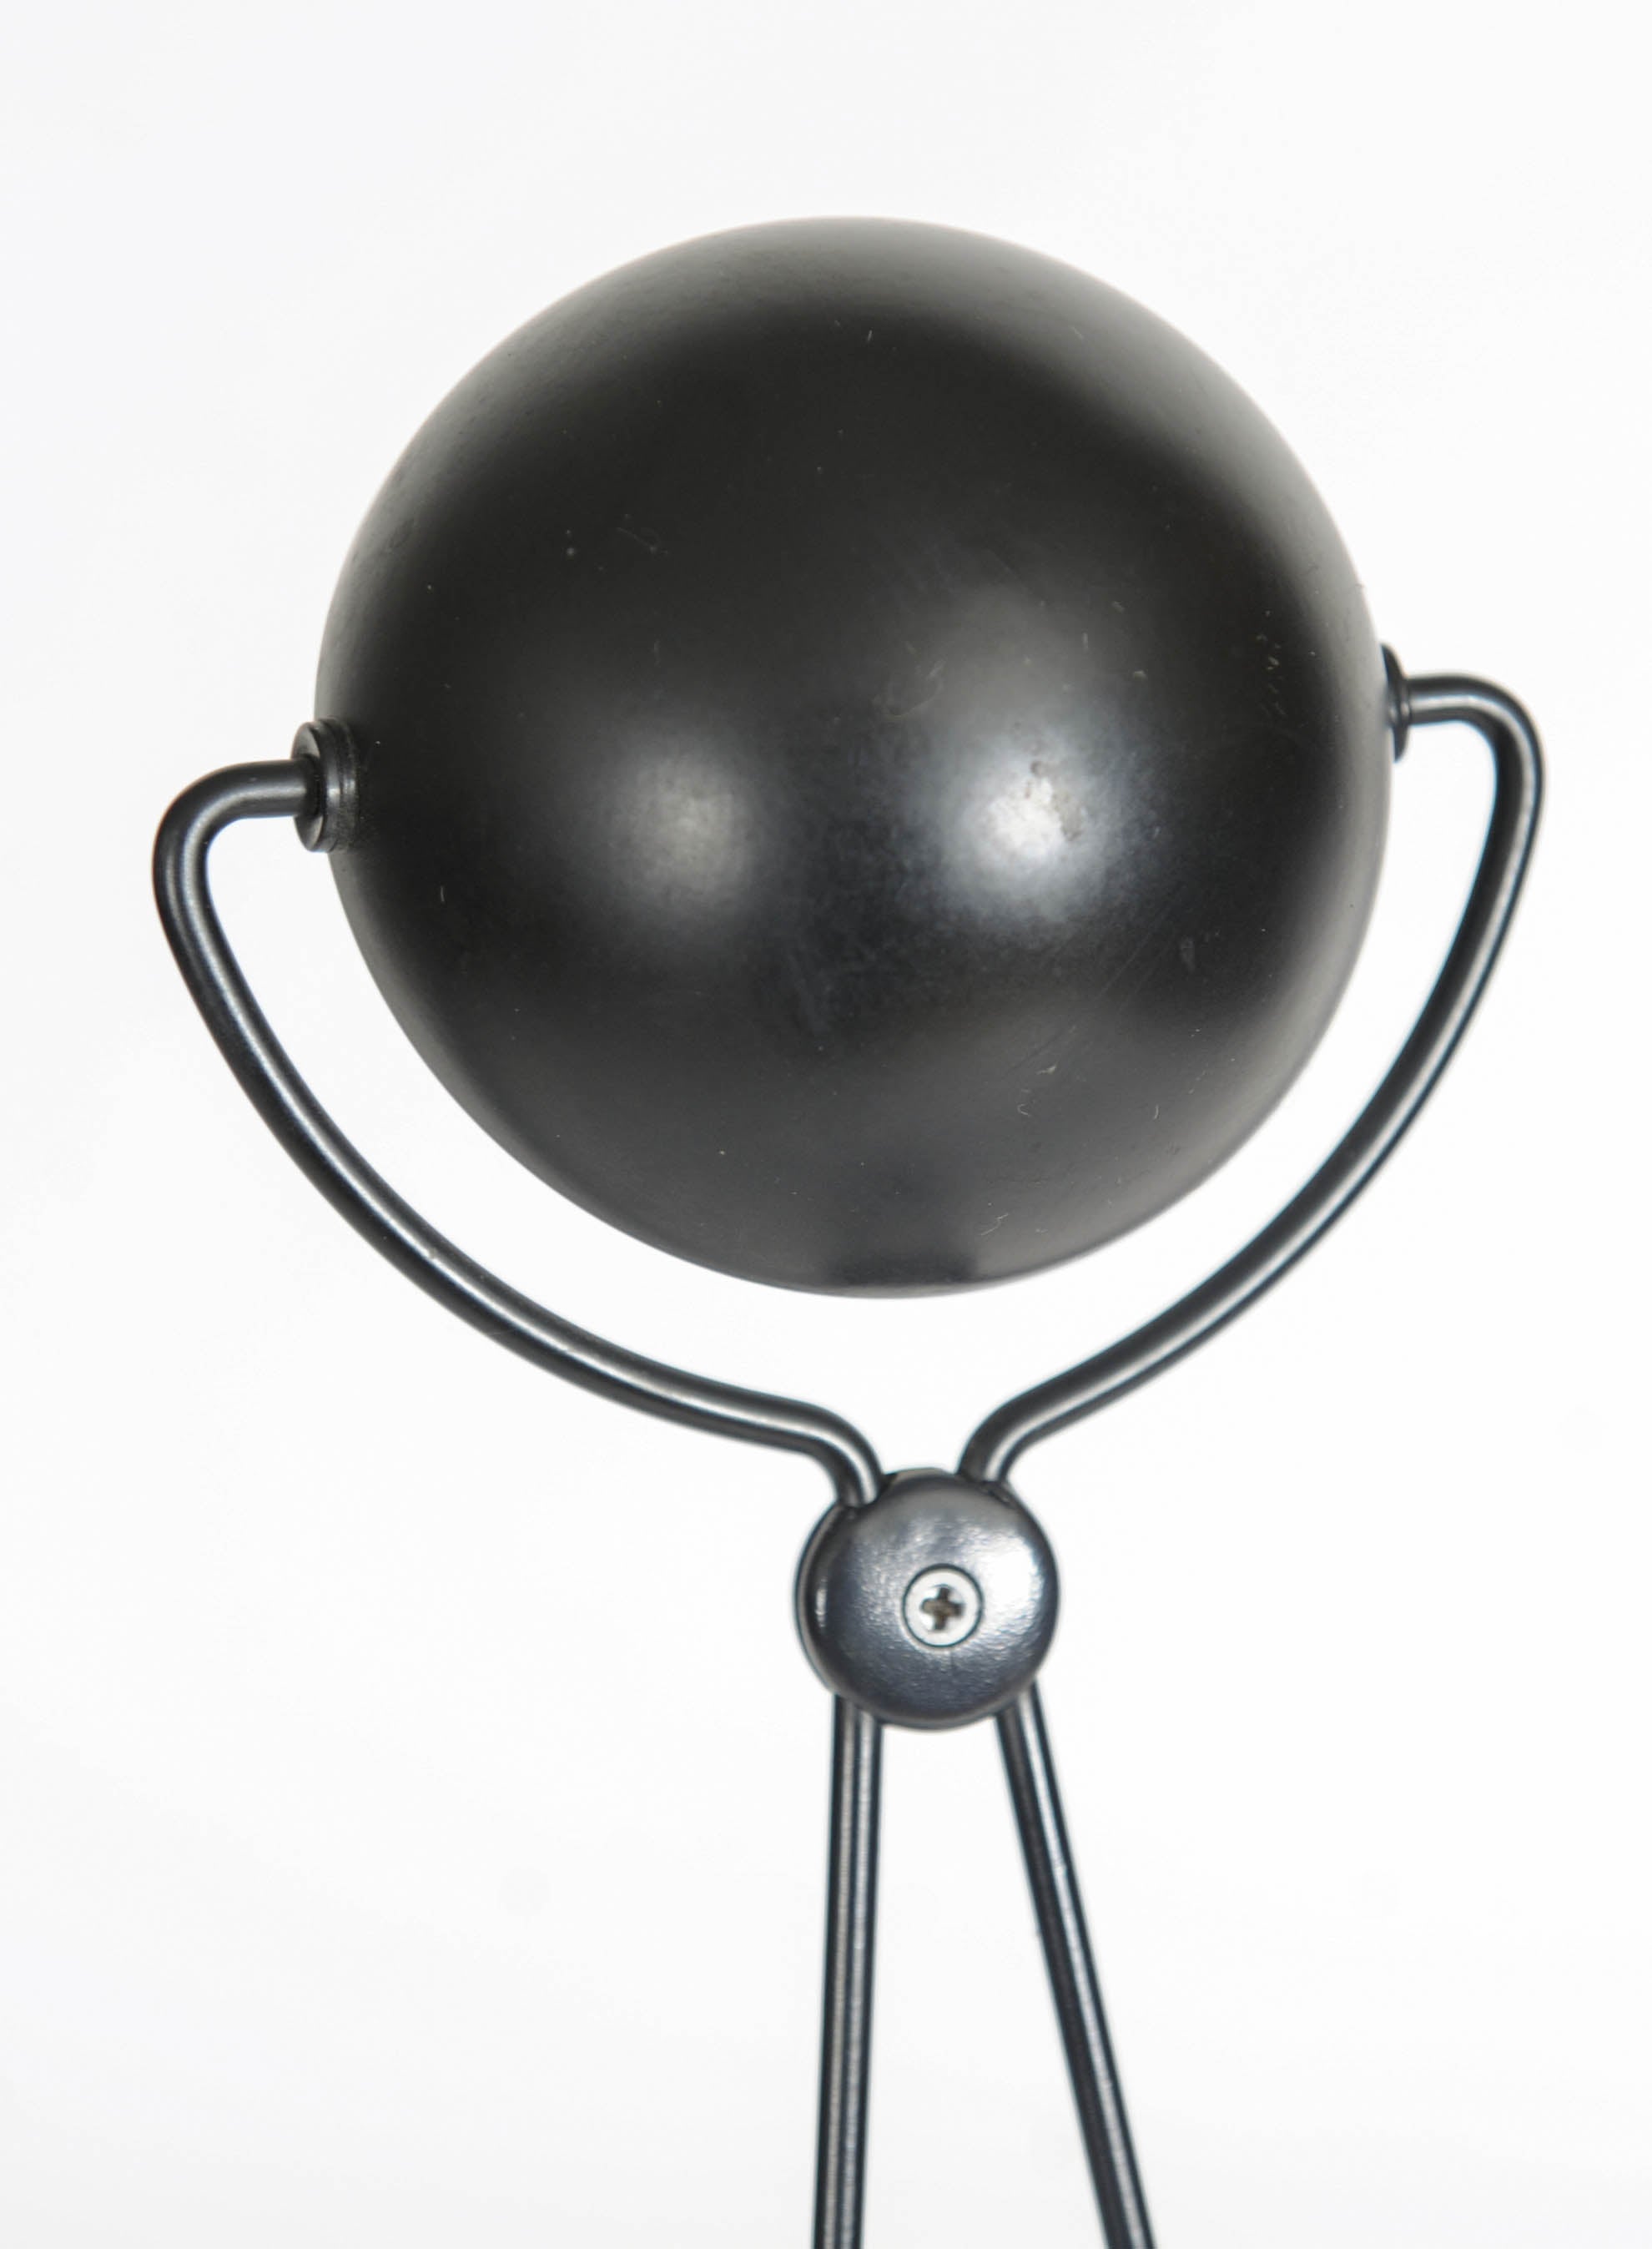 Post-Modern Postmodern Table or Desk Lamp Meridiana by Paolo Piva for Stefano Cevoli For Sale